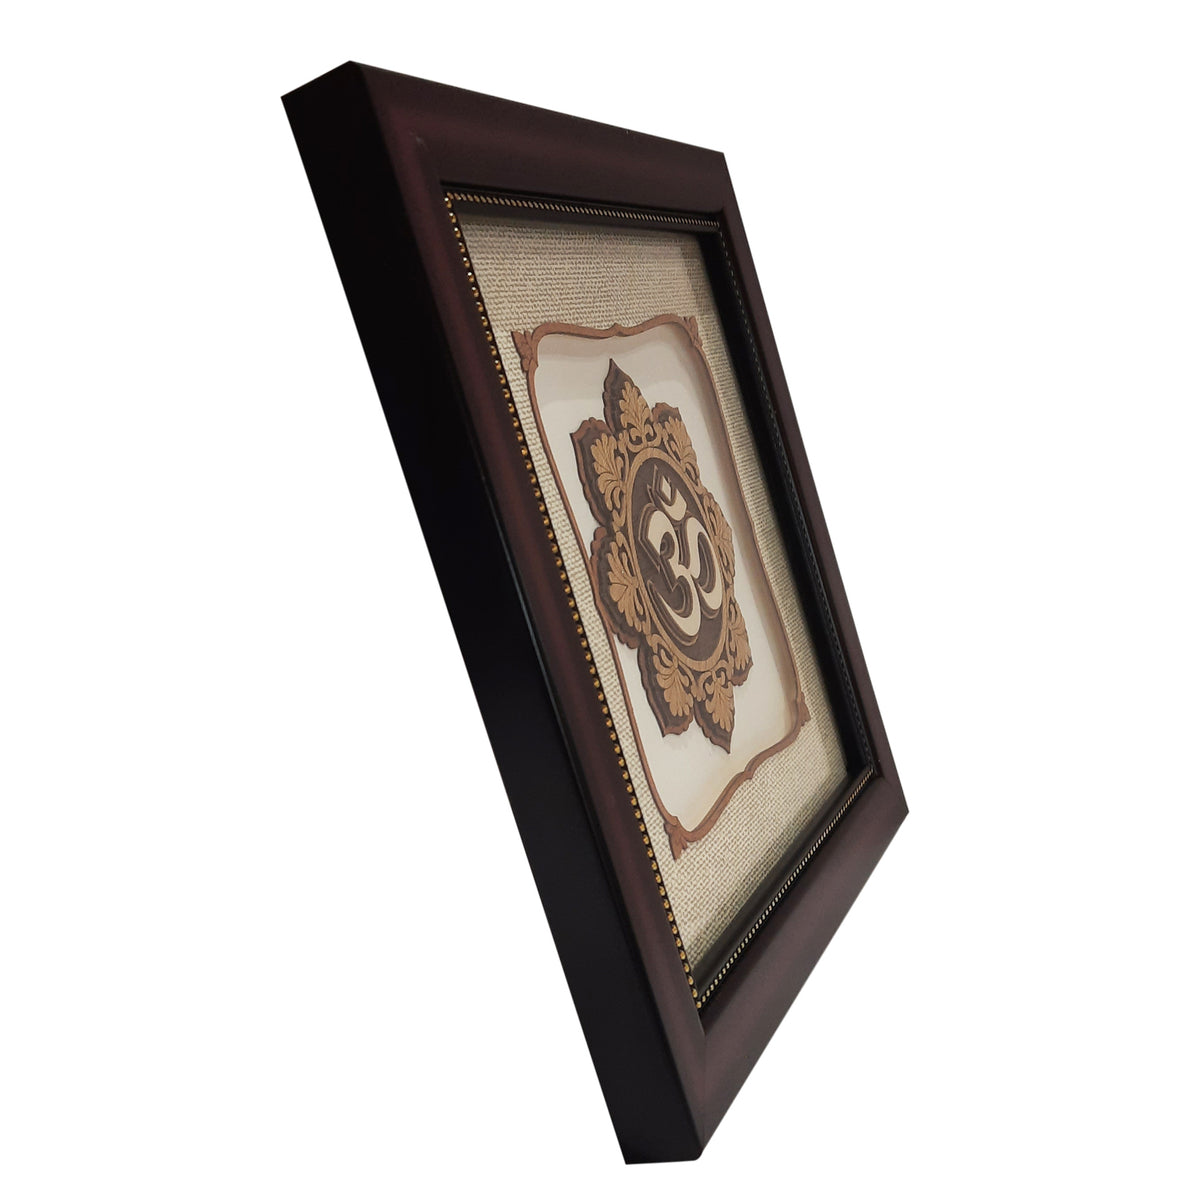 HAUS AND HUES Solid Oak 8x8 Picture Frame Matted to 4x4 - 8x8 Square  White Picture Frames, Square Picture Frame Wood, 8 x 8 Picture Frames with